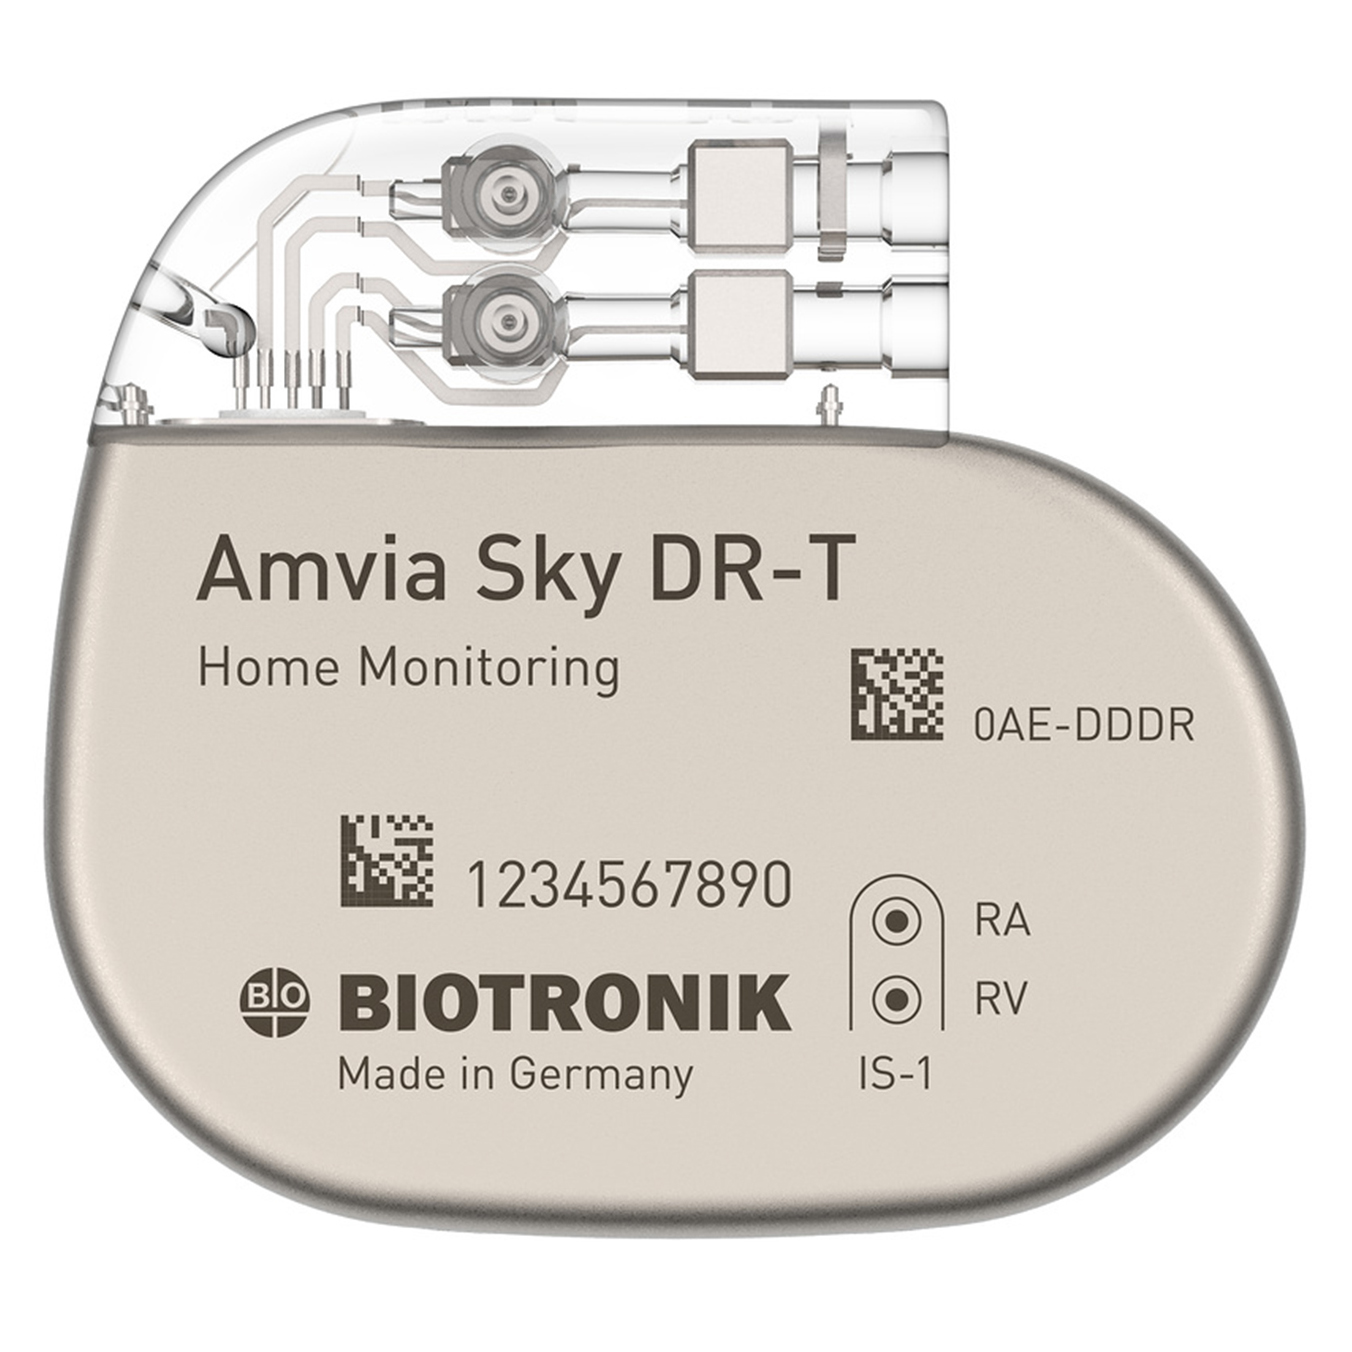 Amvia Sky DR-T dual-chamber pacemaker